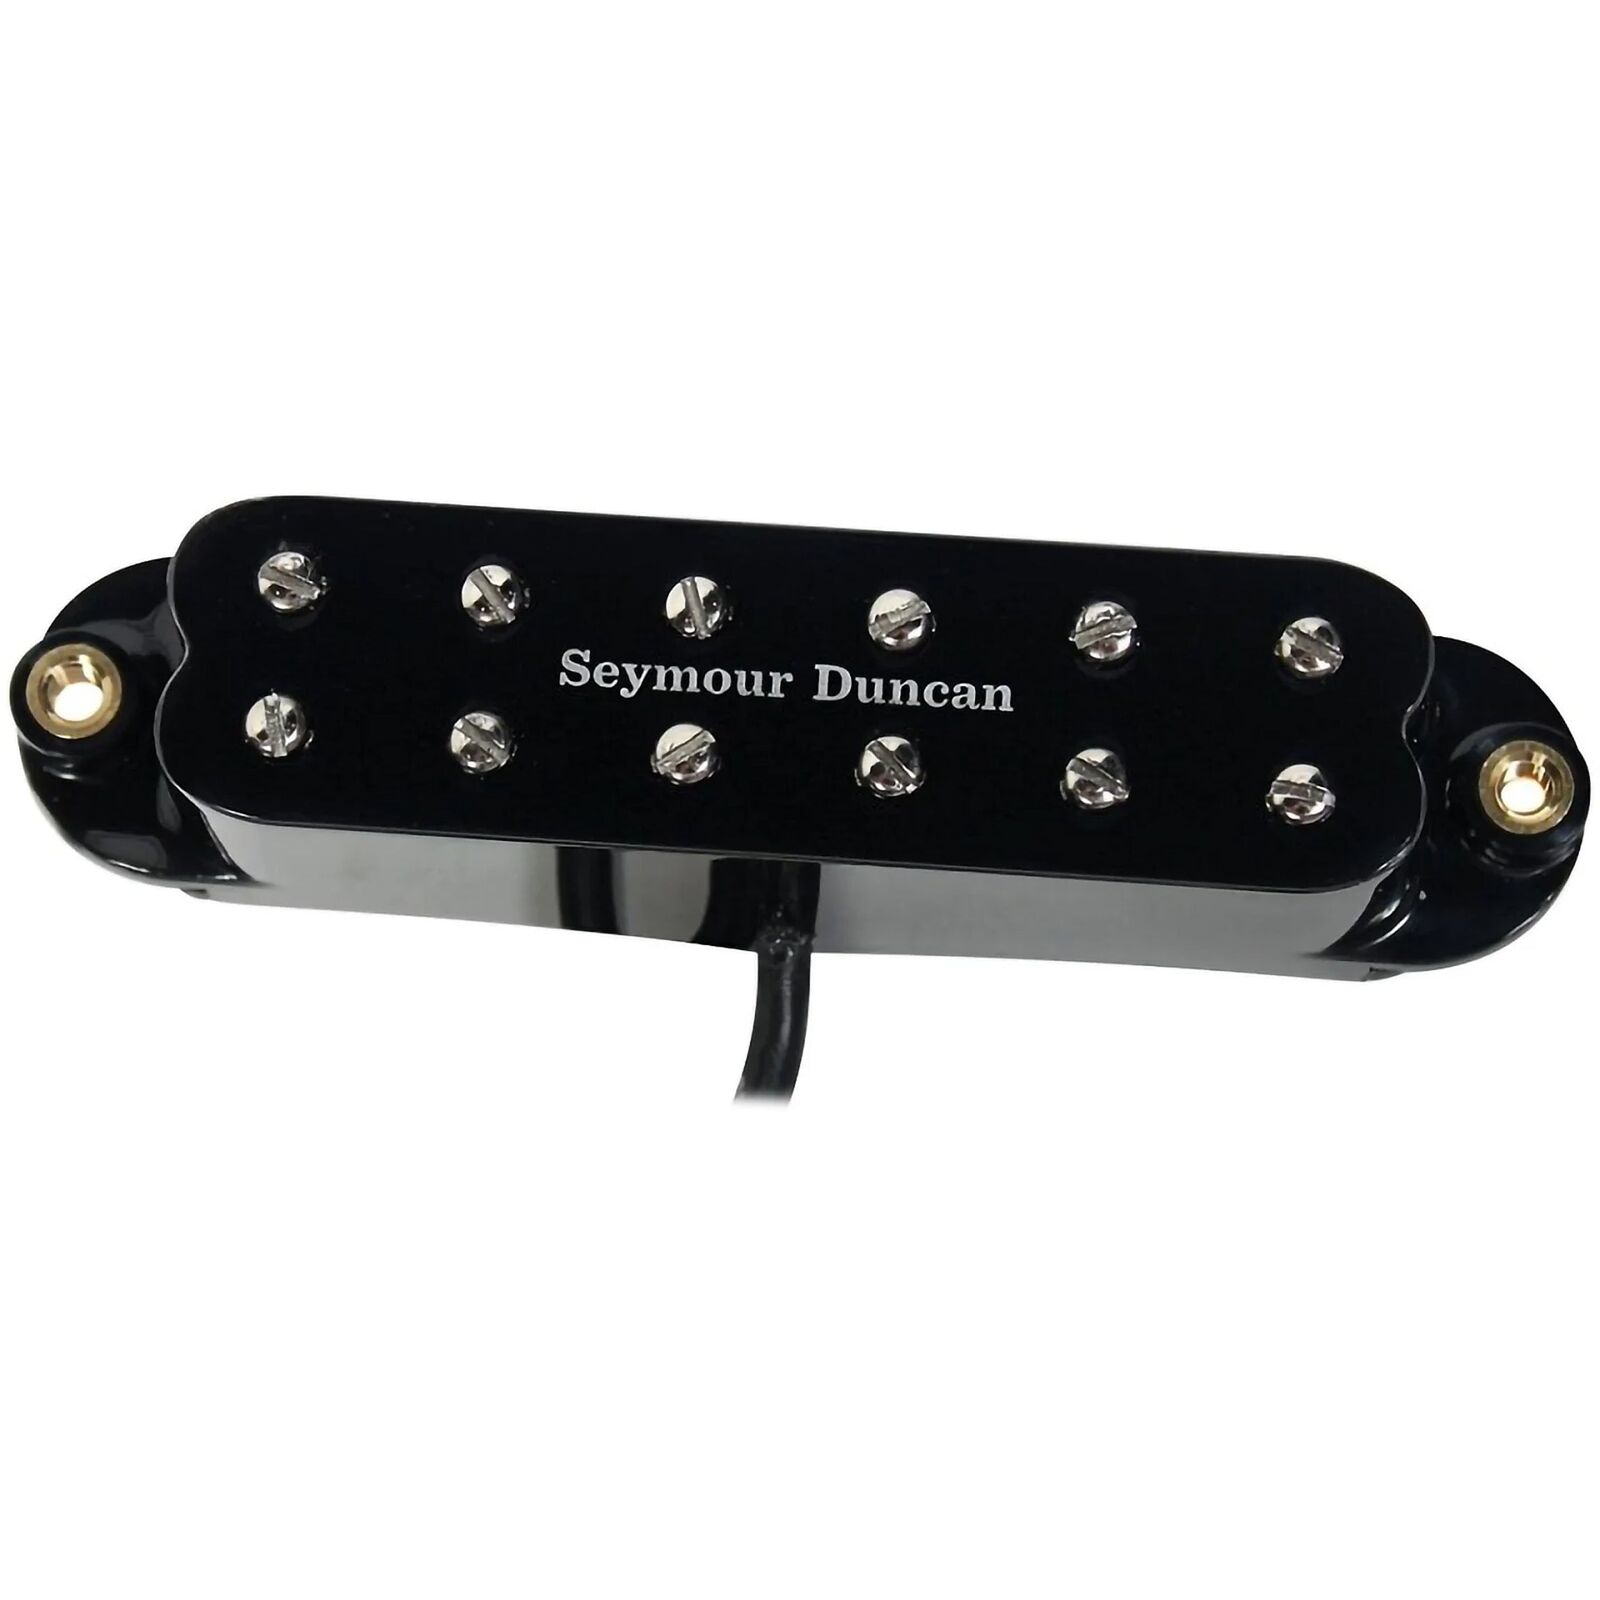 Seymour Duncan JB Jr Neck/Middle For Strat. Available Now for $75.23